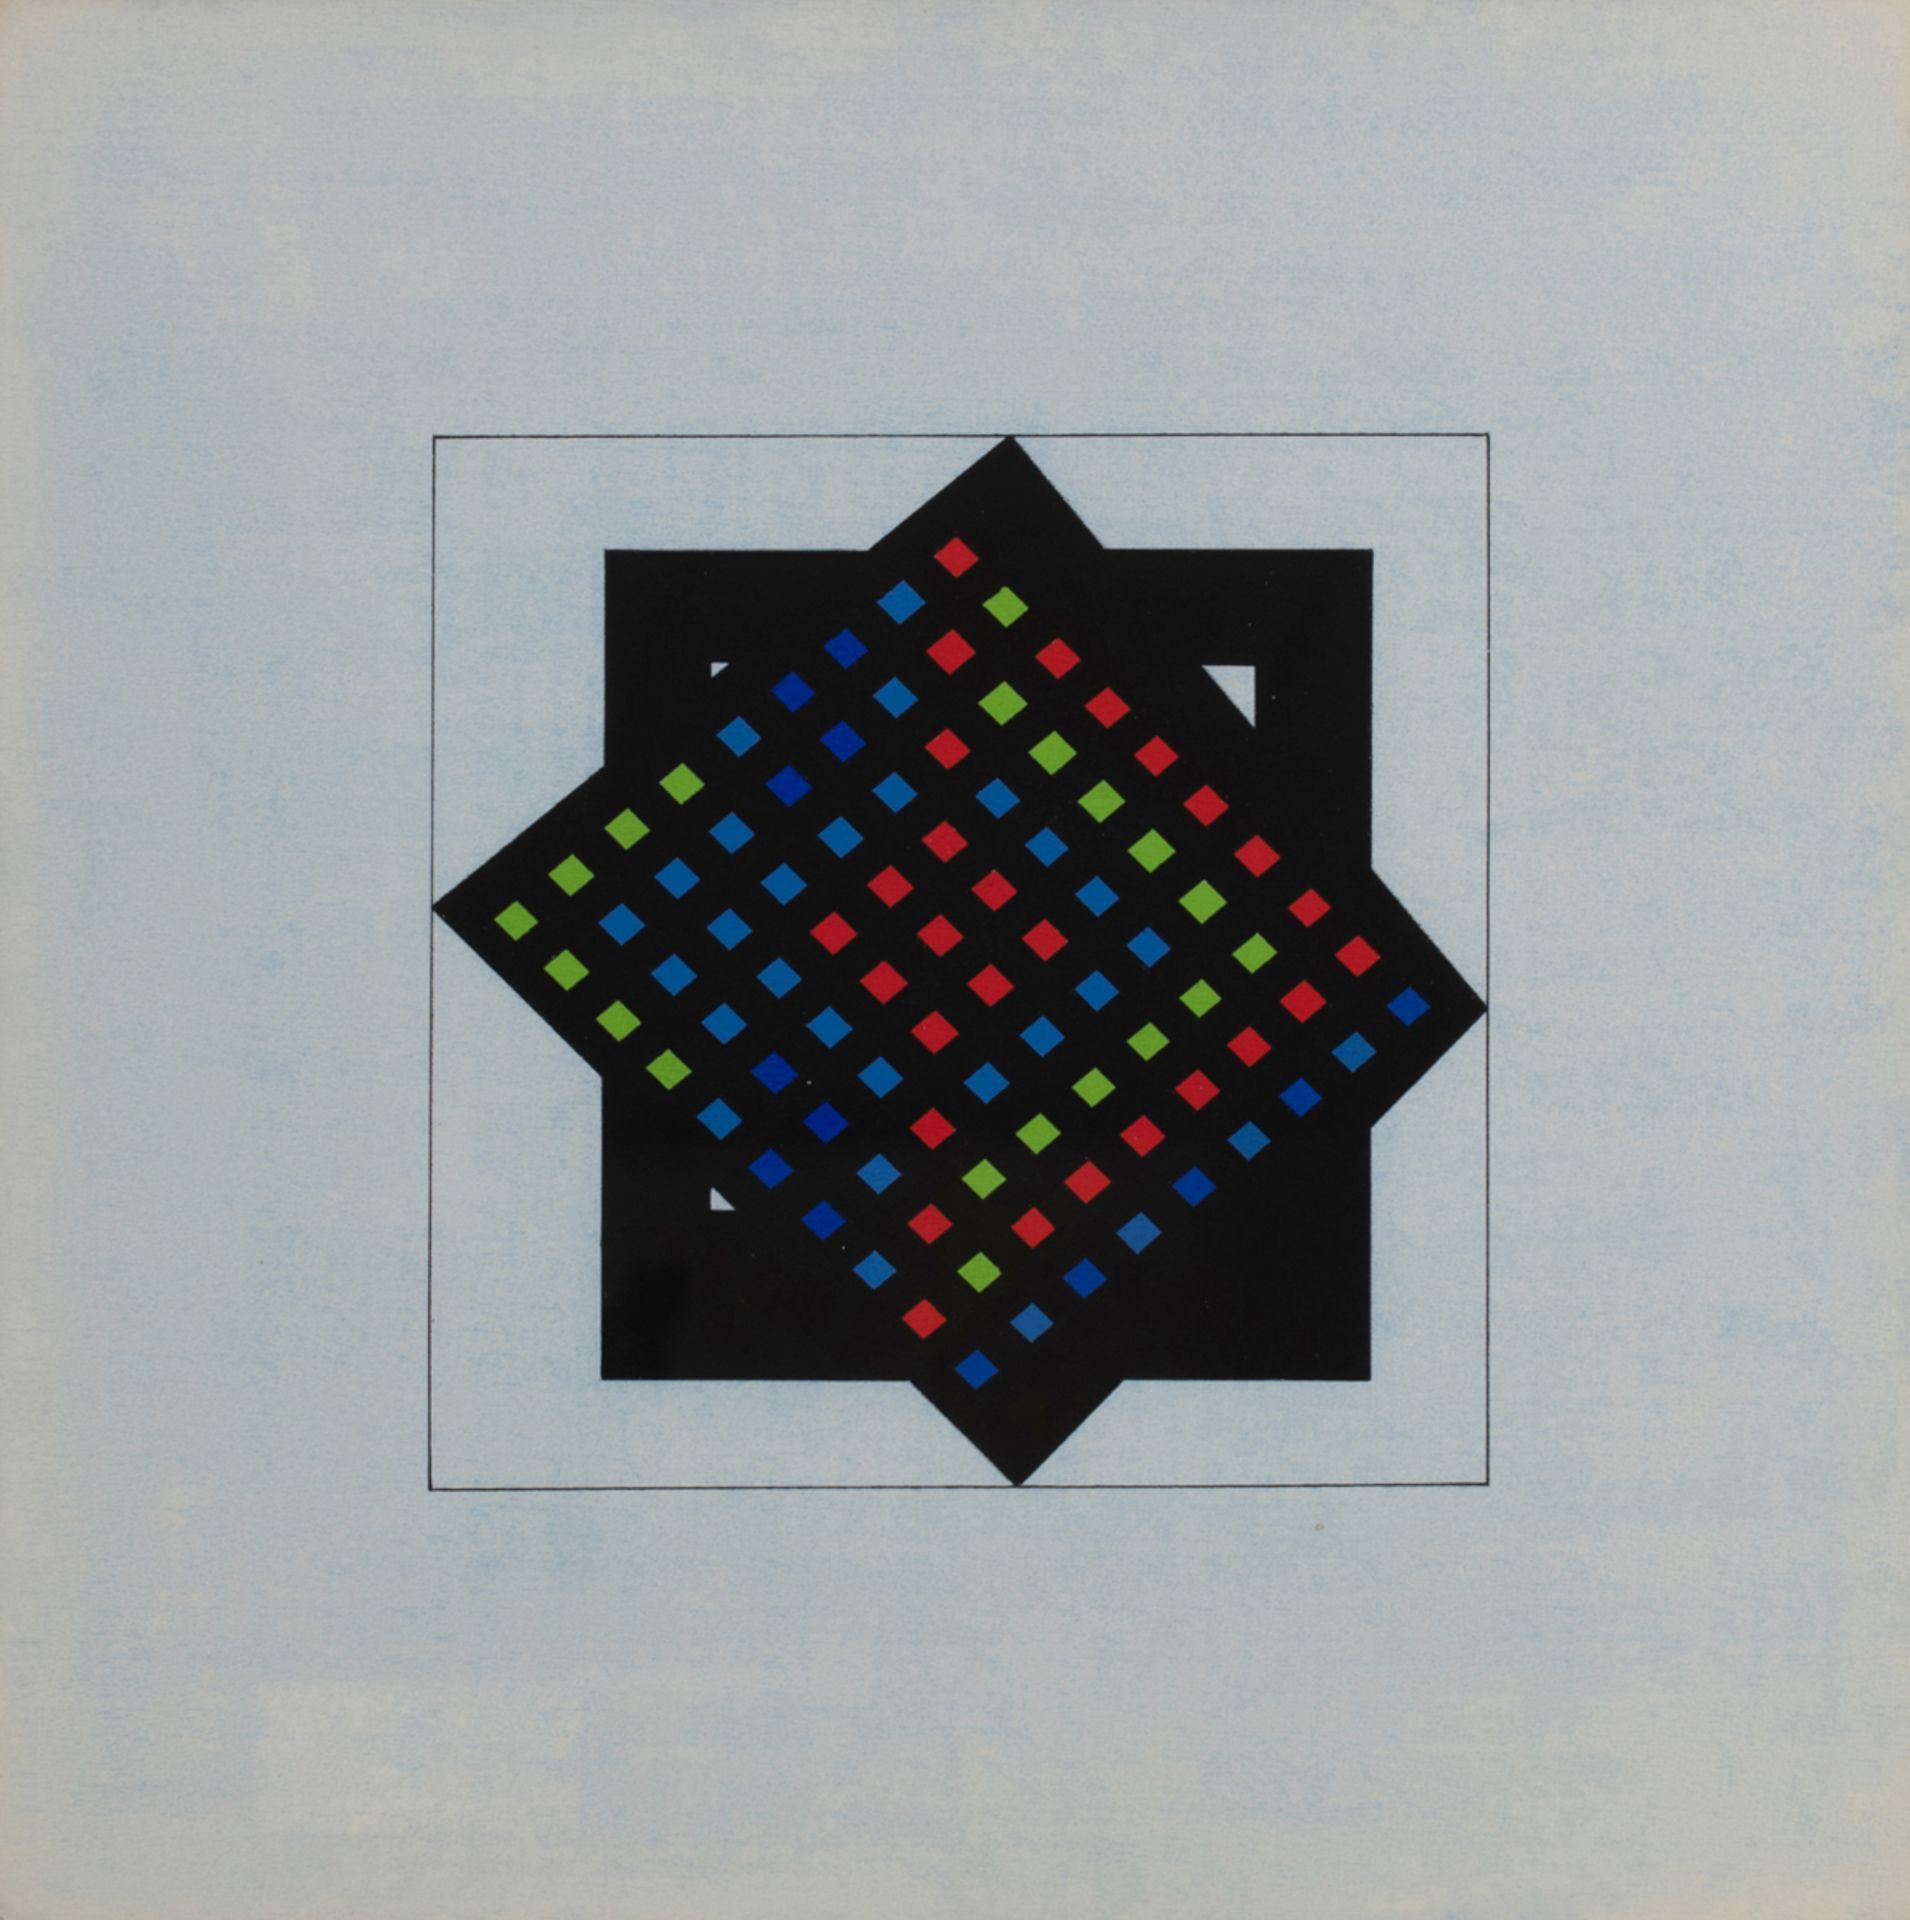 Vandenbranden G., a geometric abstraction, dated (19)69, acrylic and colour pencil on Steinbach pape